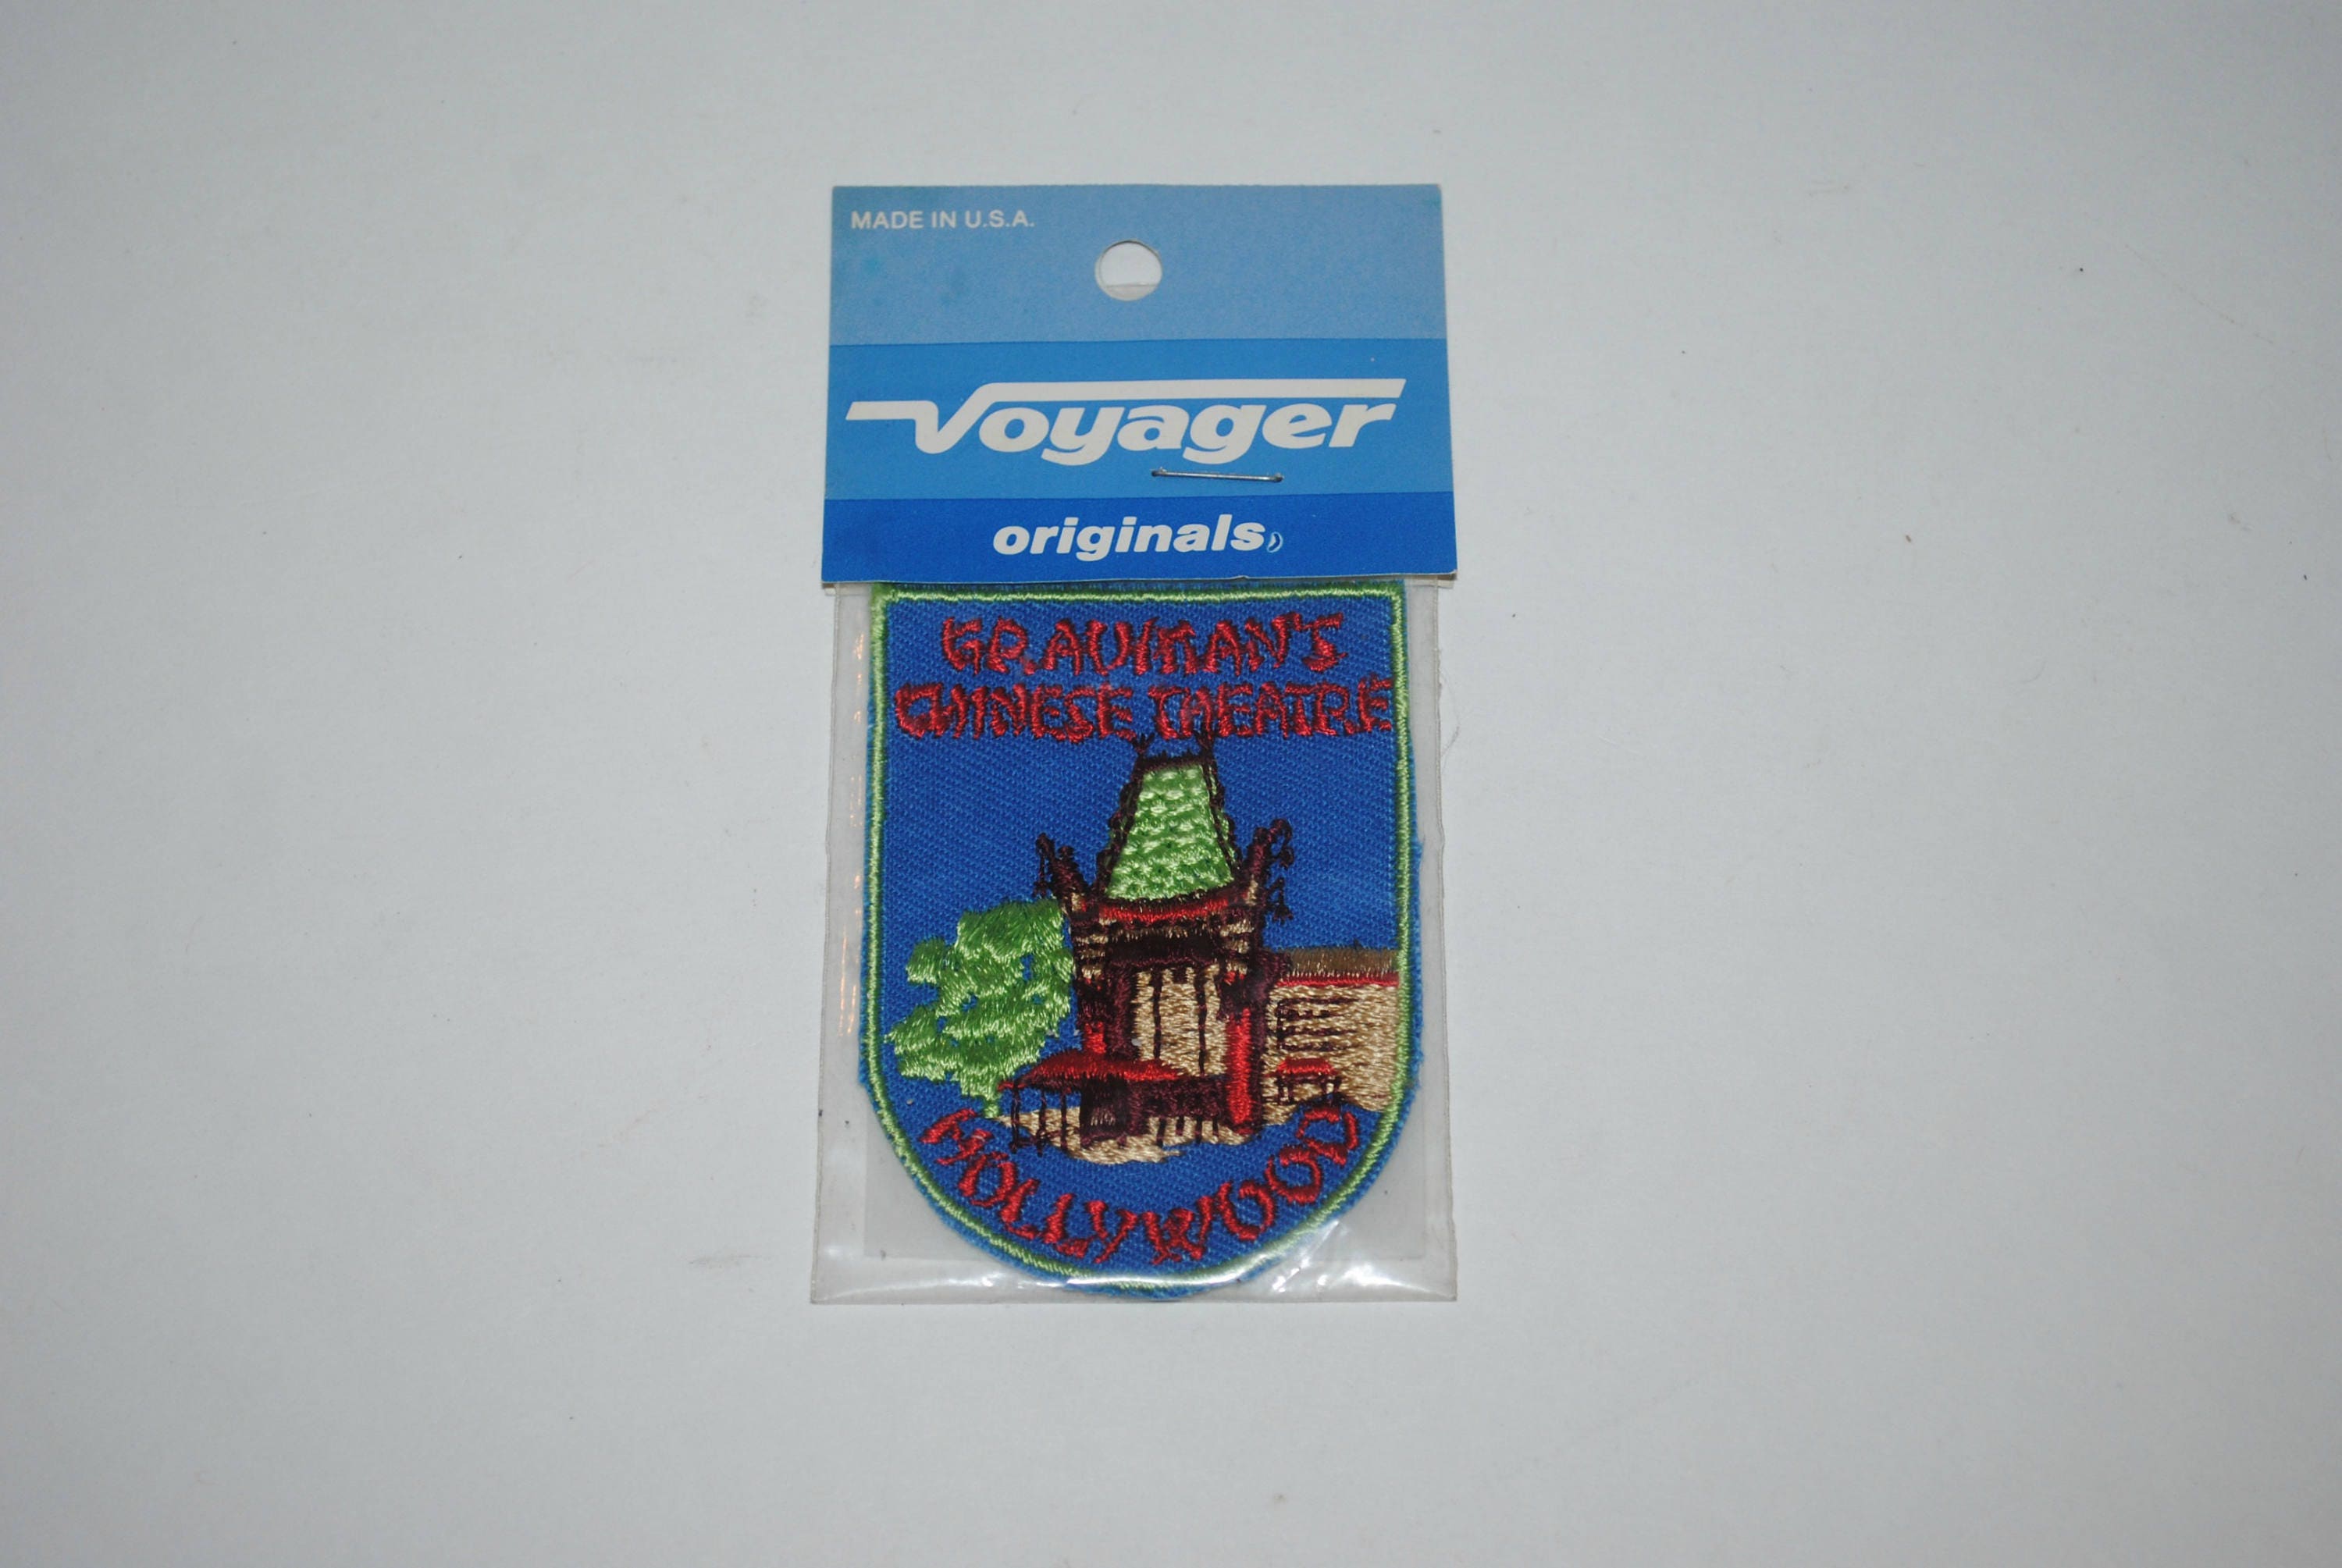 VTG VOYAGER GRUMMAN'S CHINESE THEATER HOLLYWOOD 2.75" X 2" EMBROIDERED PATCH NIP 